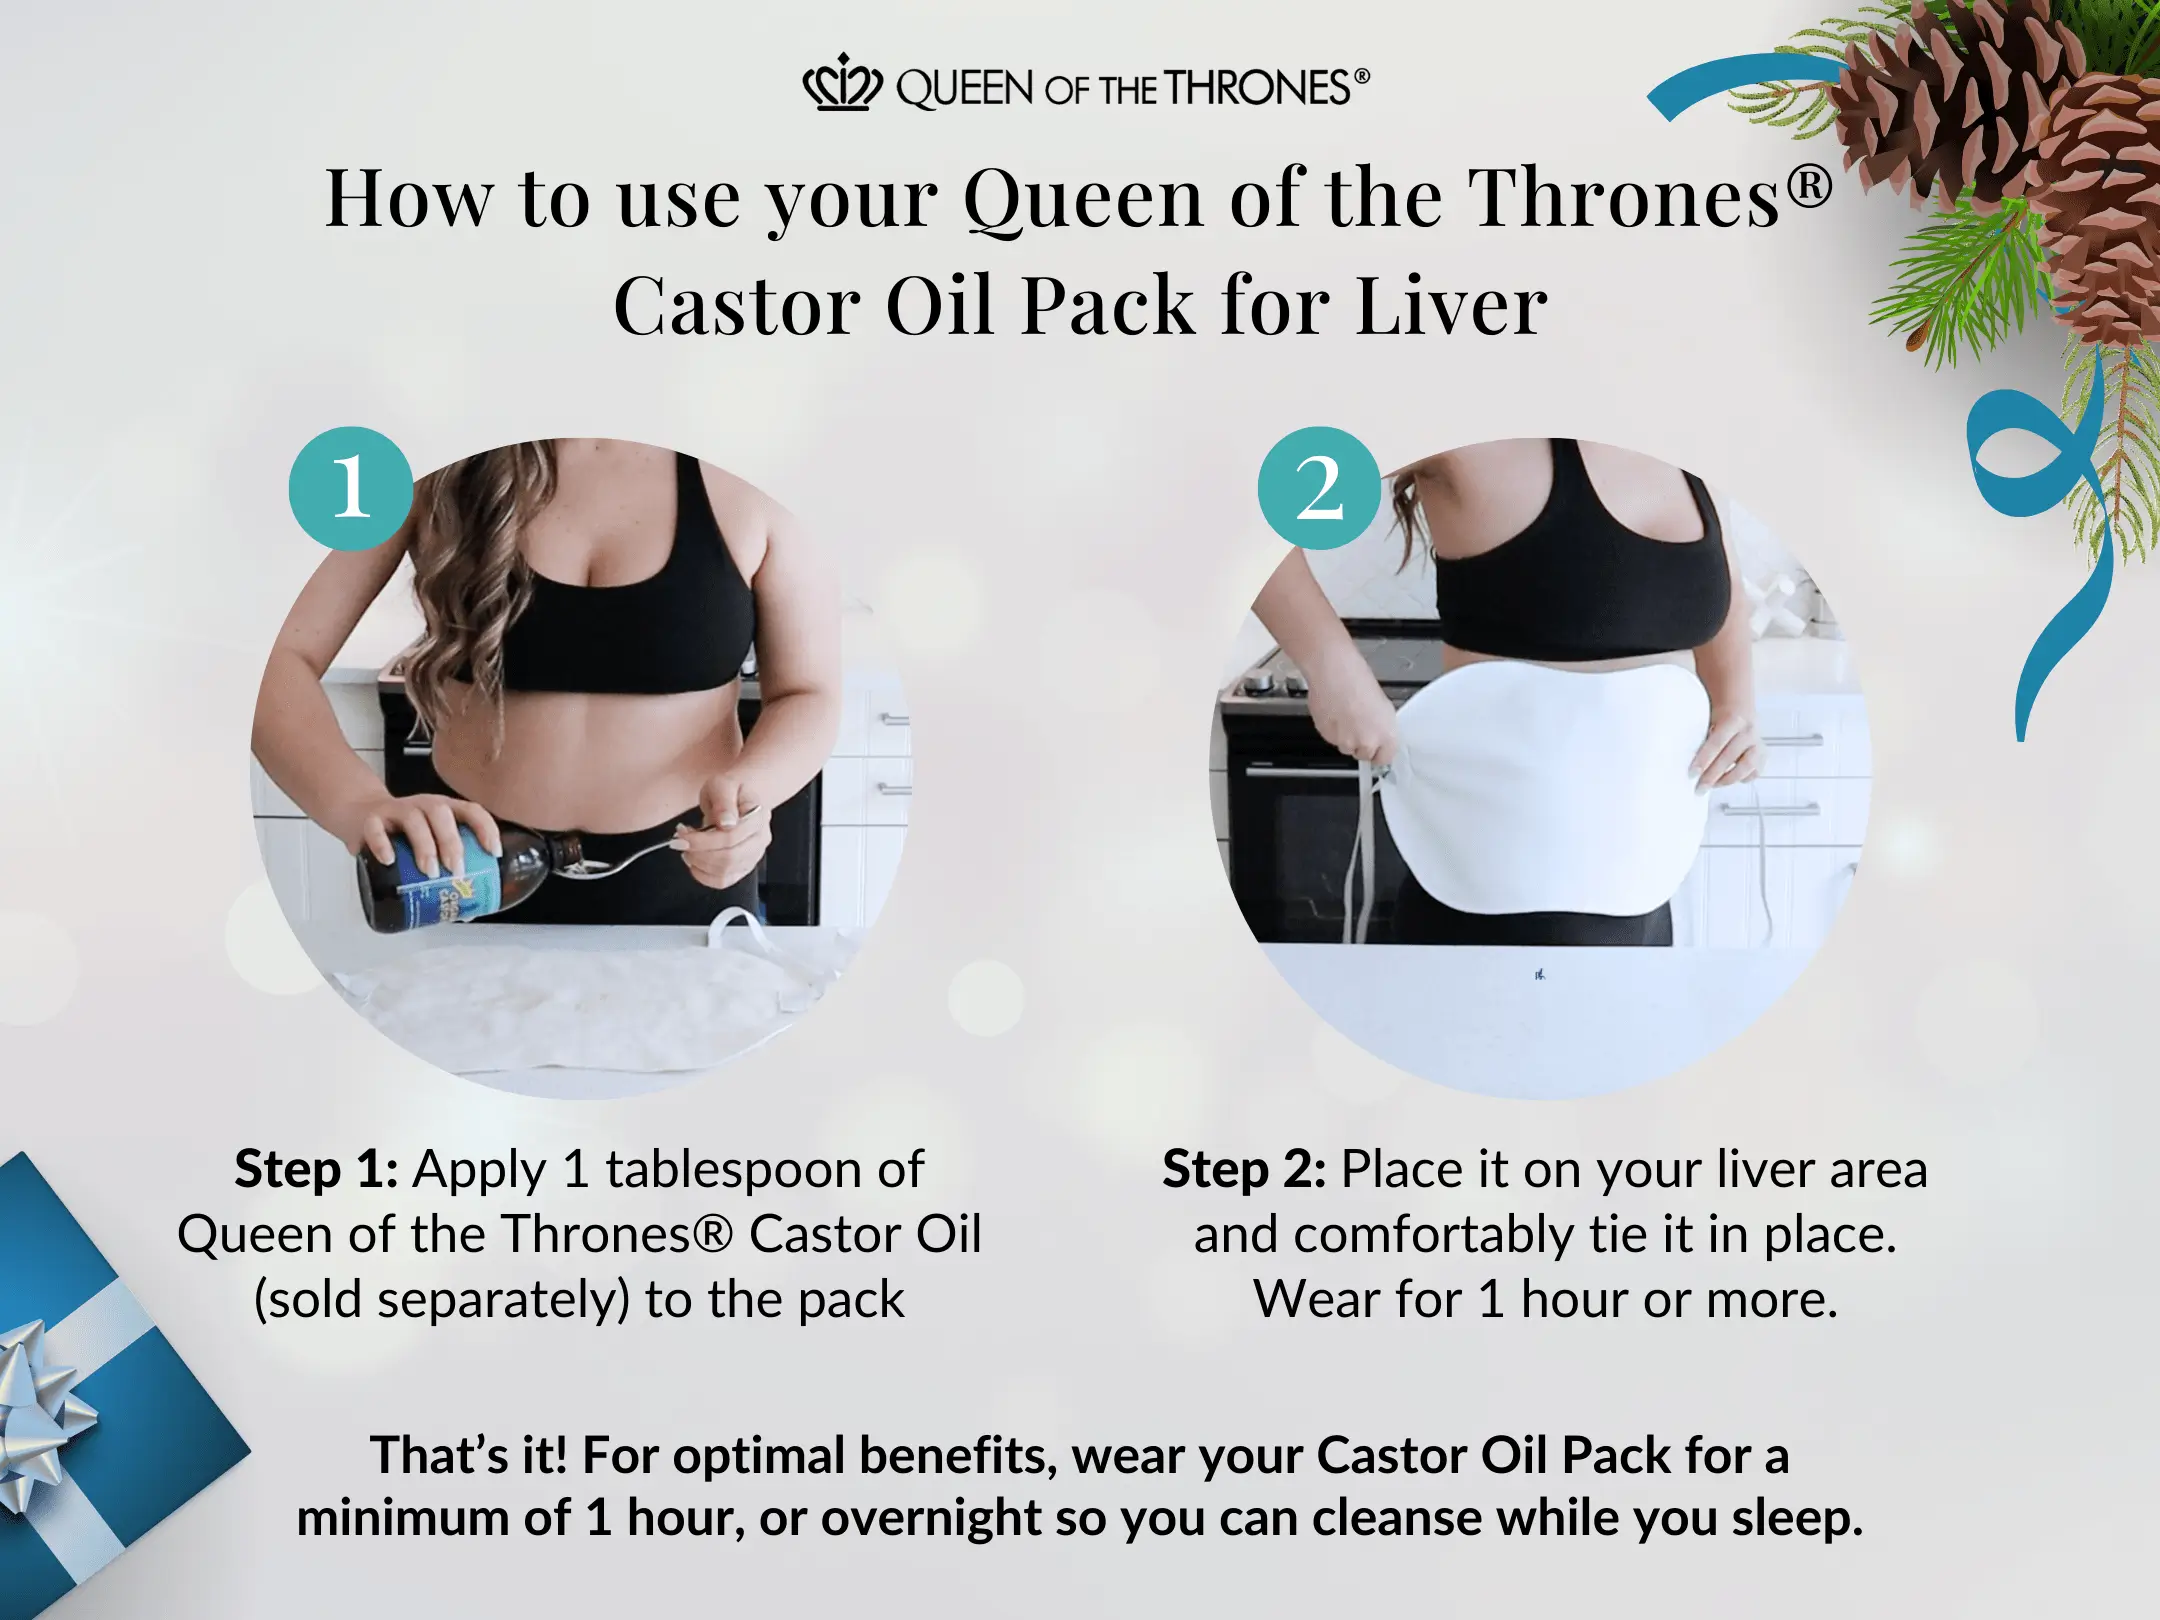 Learn how to use Queen of the Thrones Castor Oil Pack for liver 